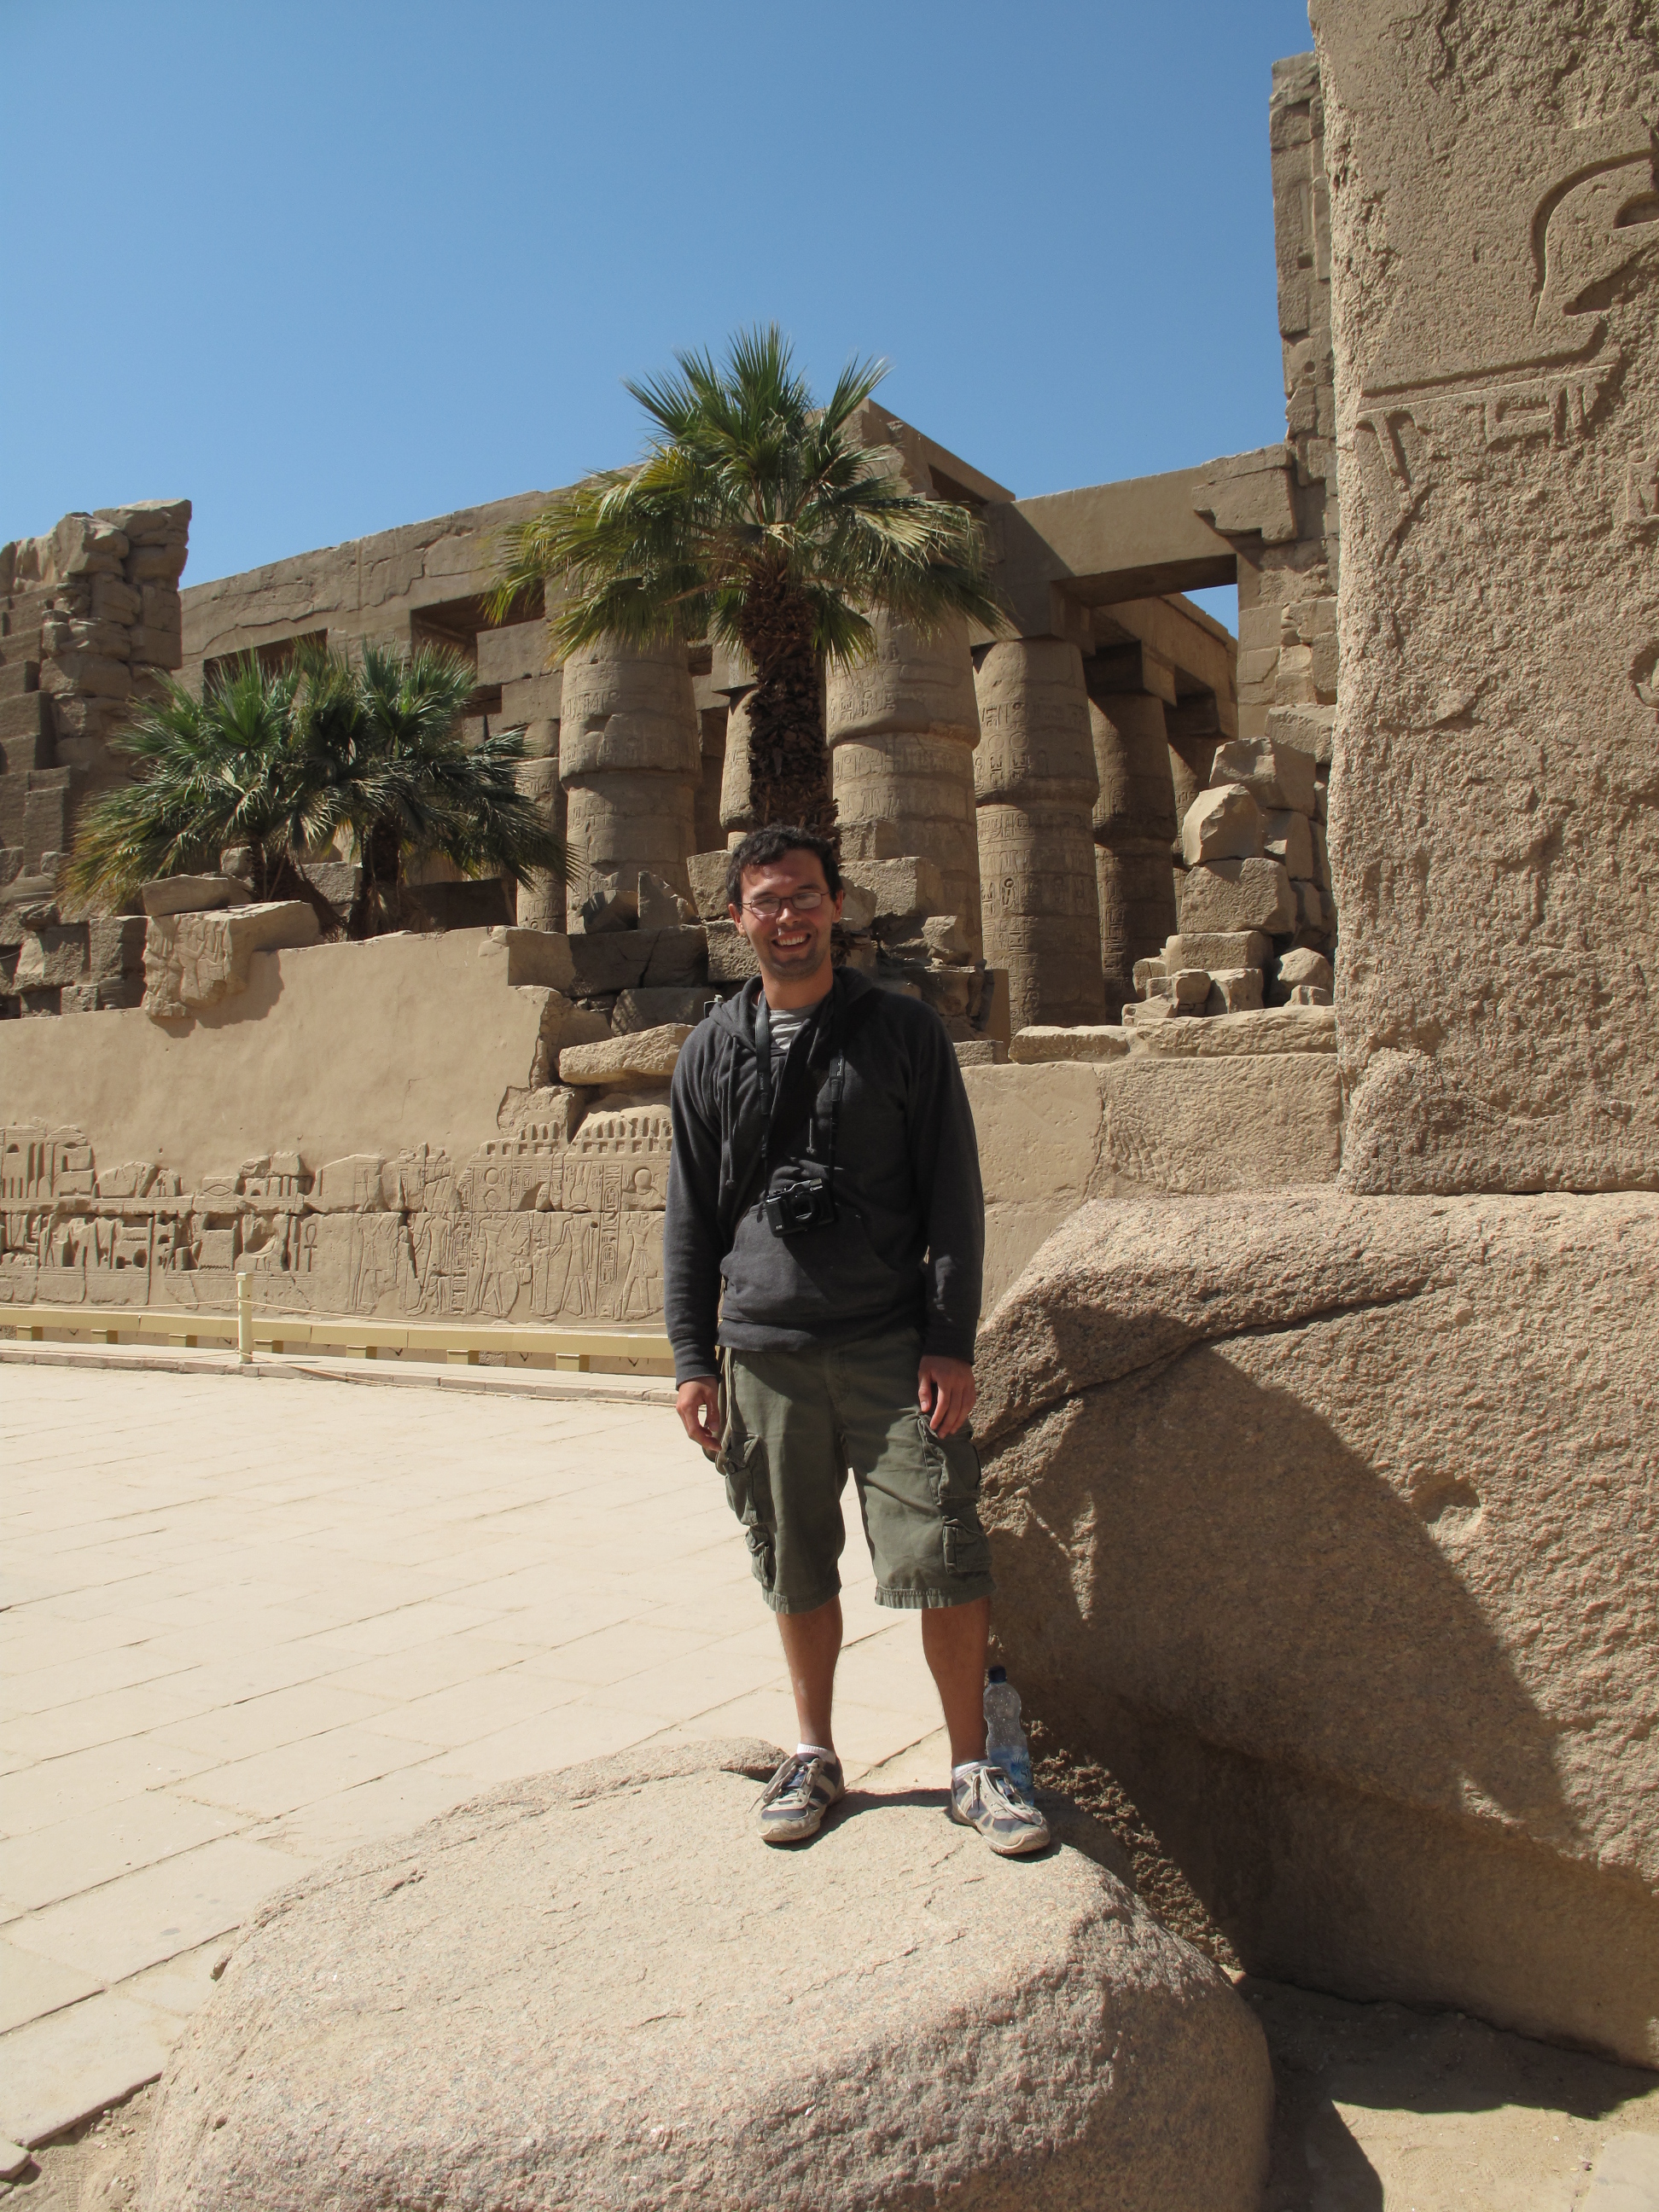 This is a picture of me in Egypt again in a temple complex.